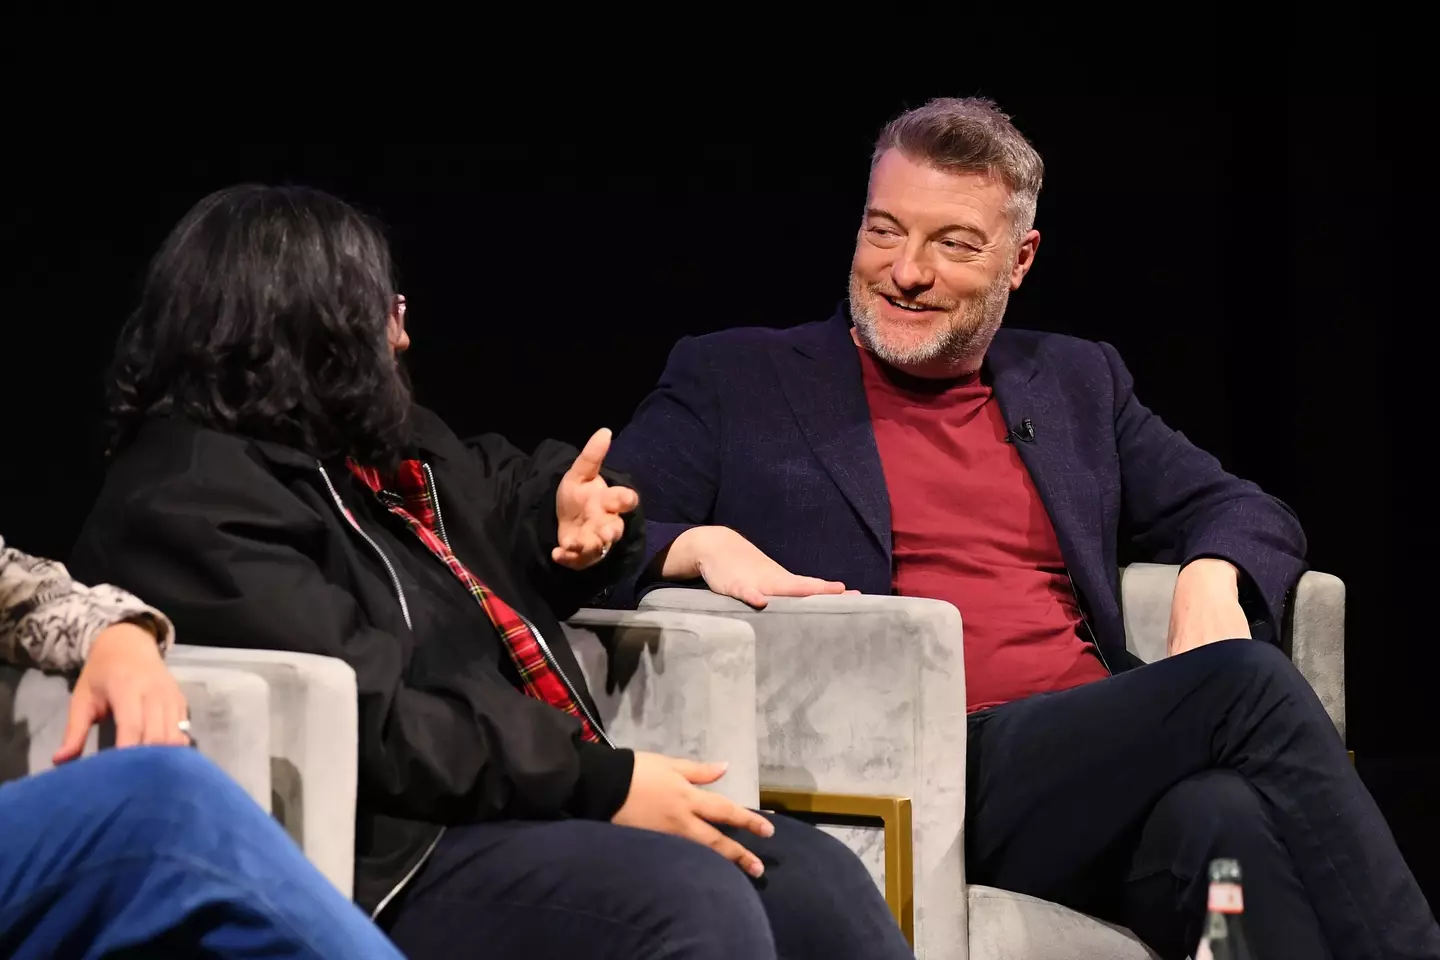 Black Mirror creator Charlie Brooker explained that the show's title is based off a screen when it goes off.